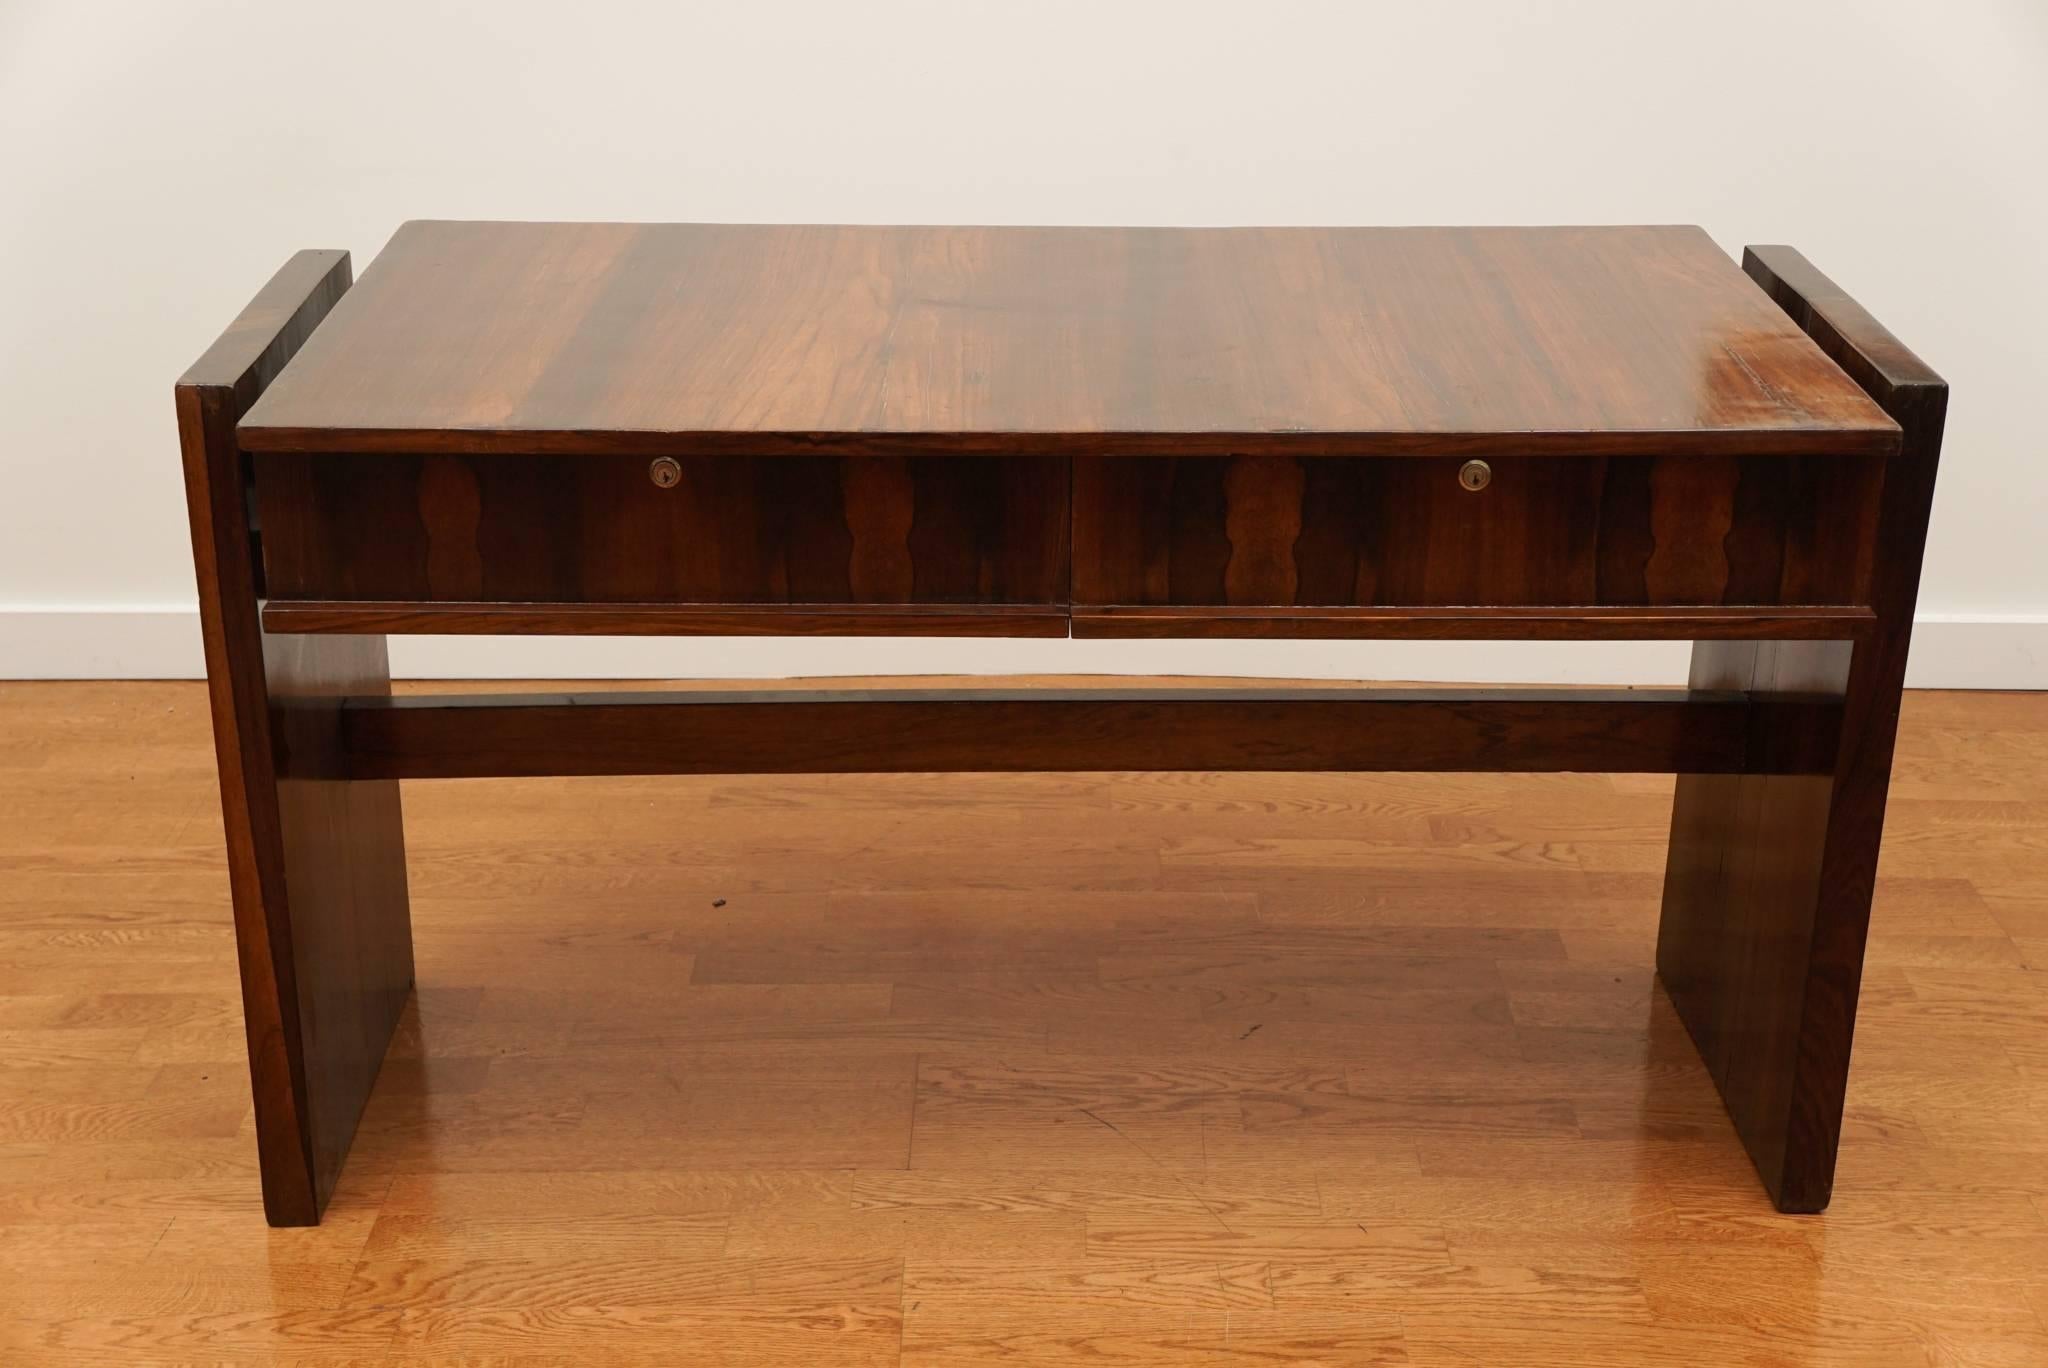 Handsome Mid-Century Brazilian rosewood desk with two drawers brass escutcheons and original brass keys!